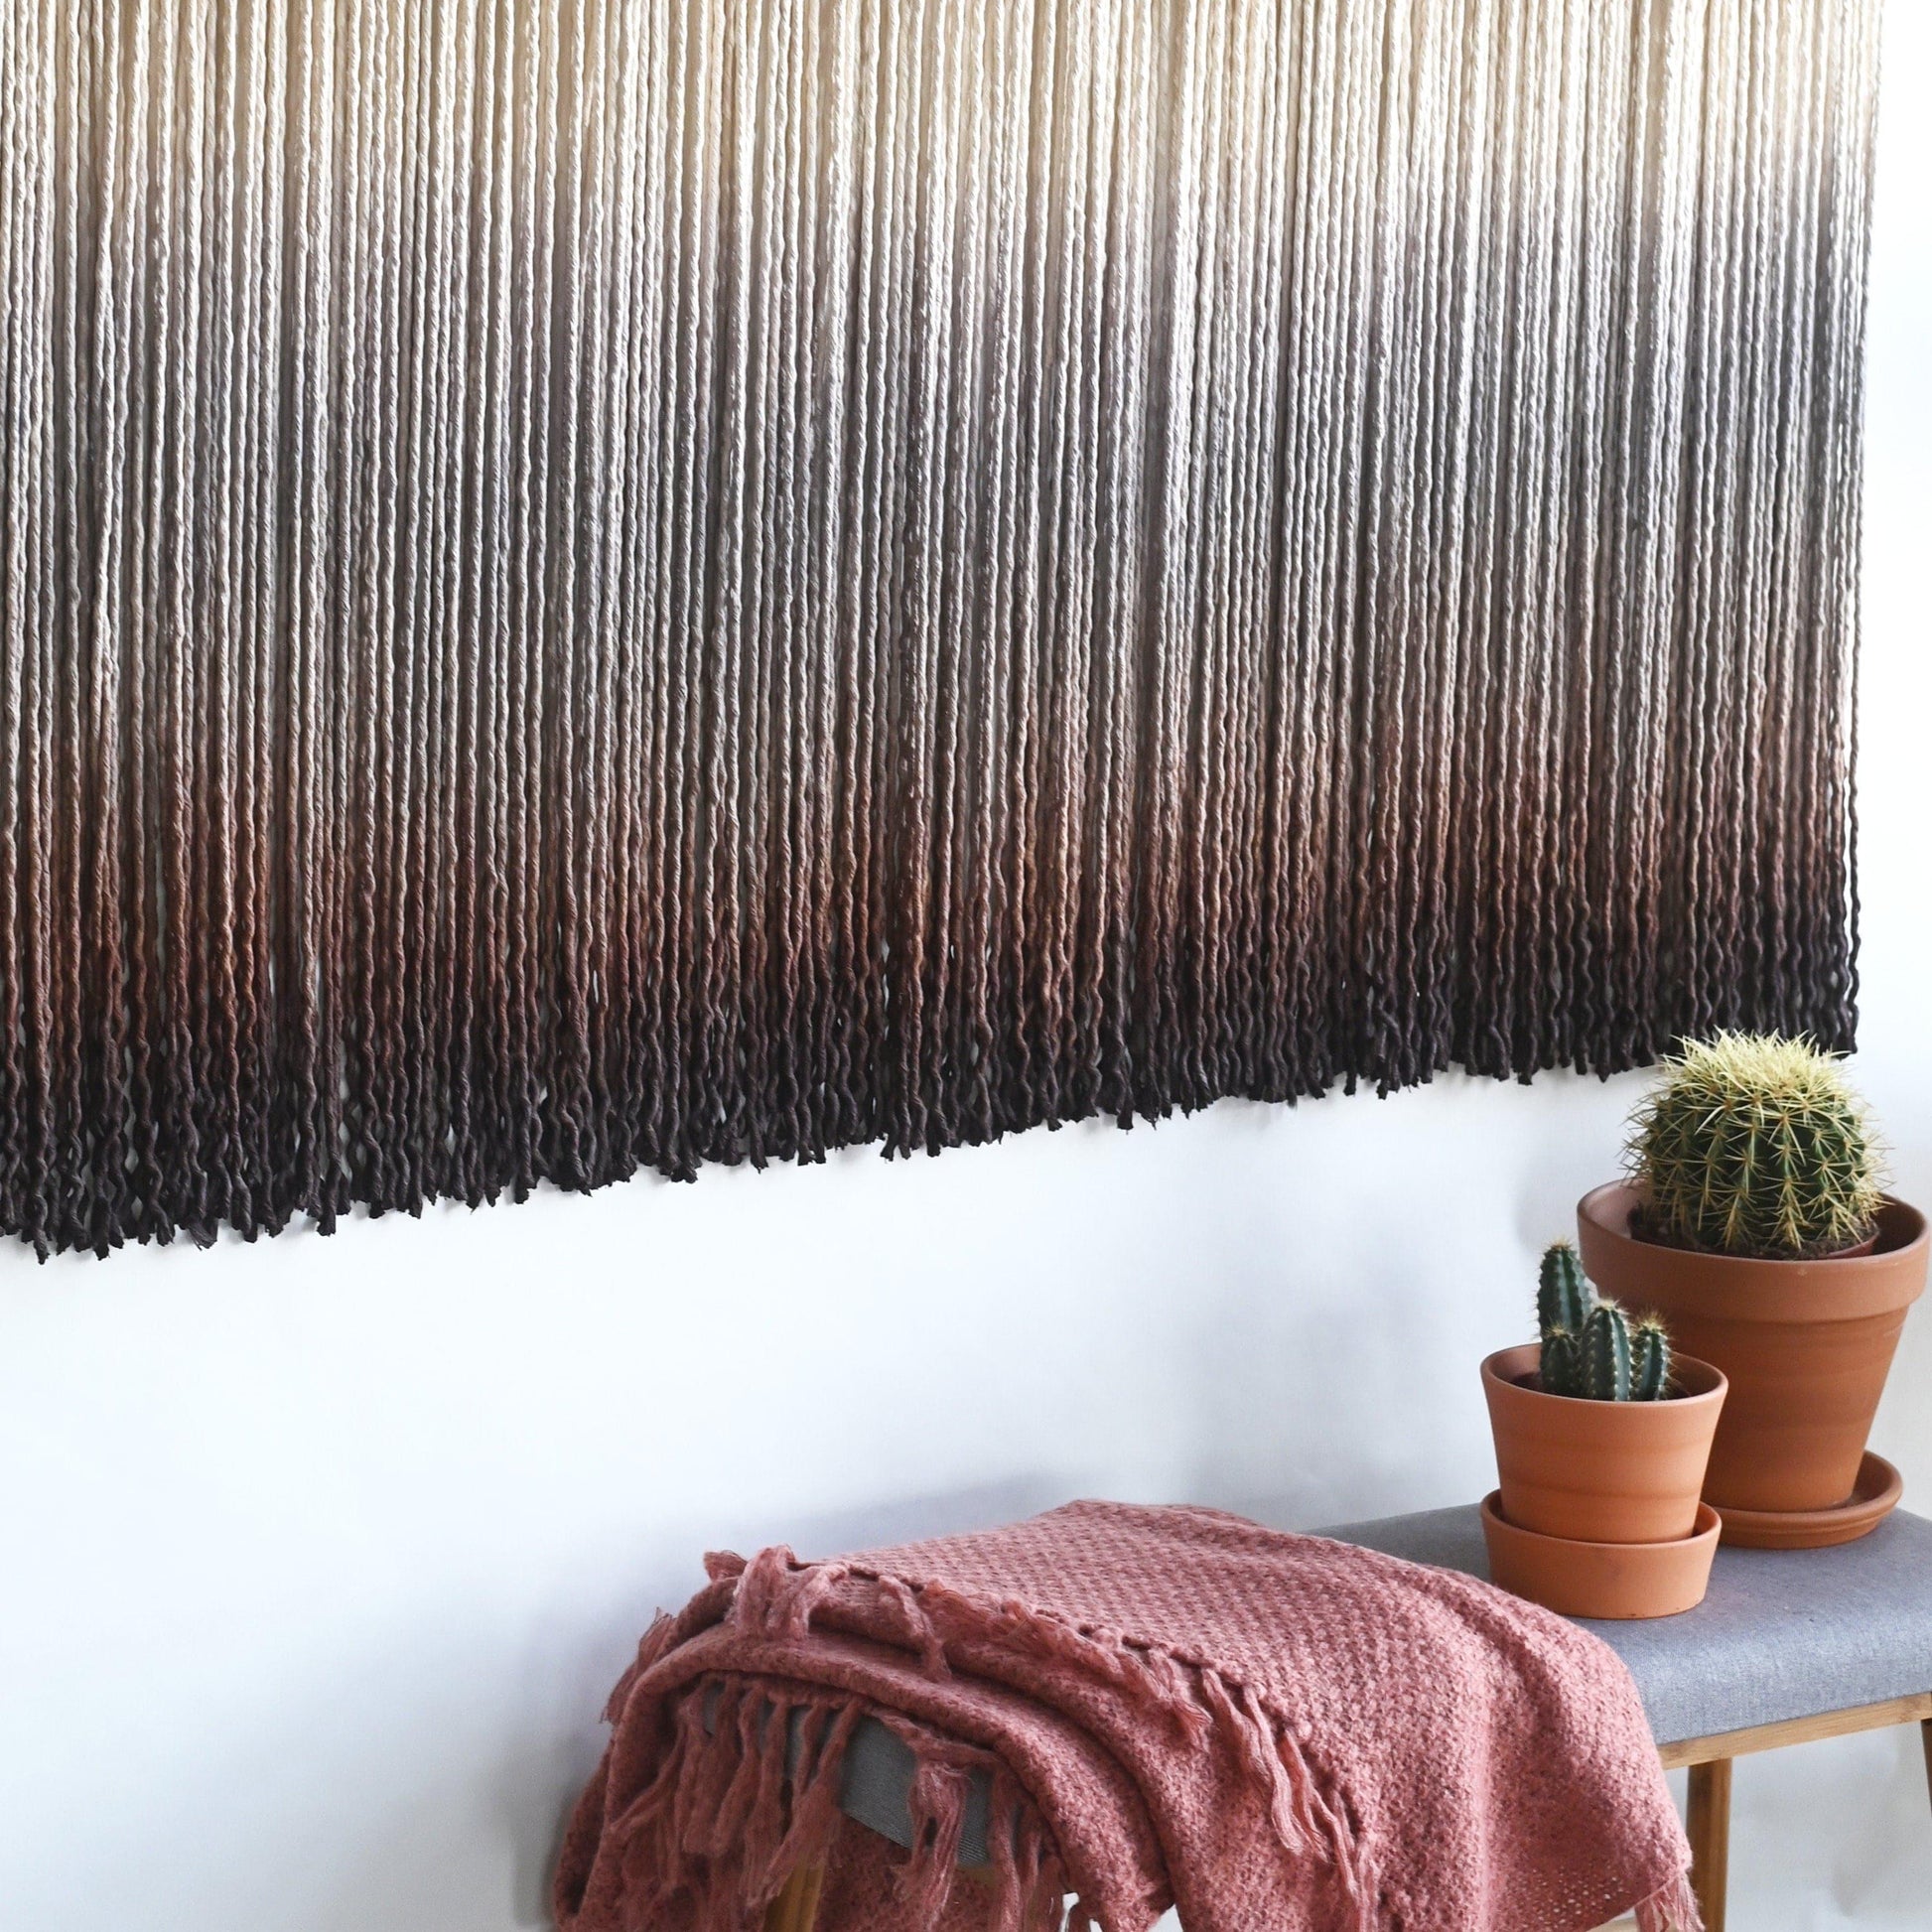 Large dip dyed fiber art wall hanging. by The Cotton Yarn